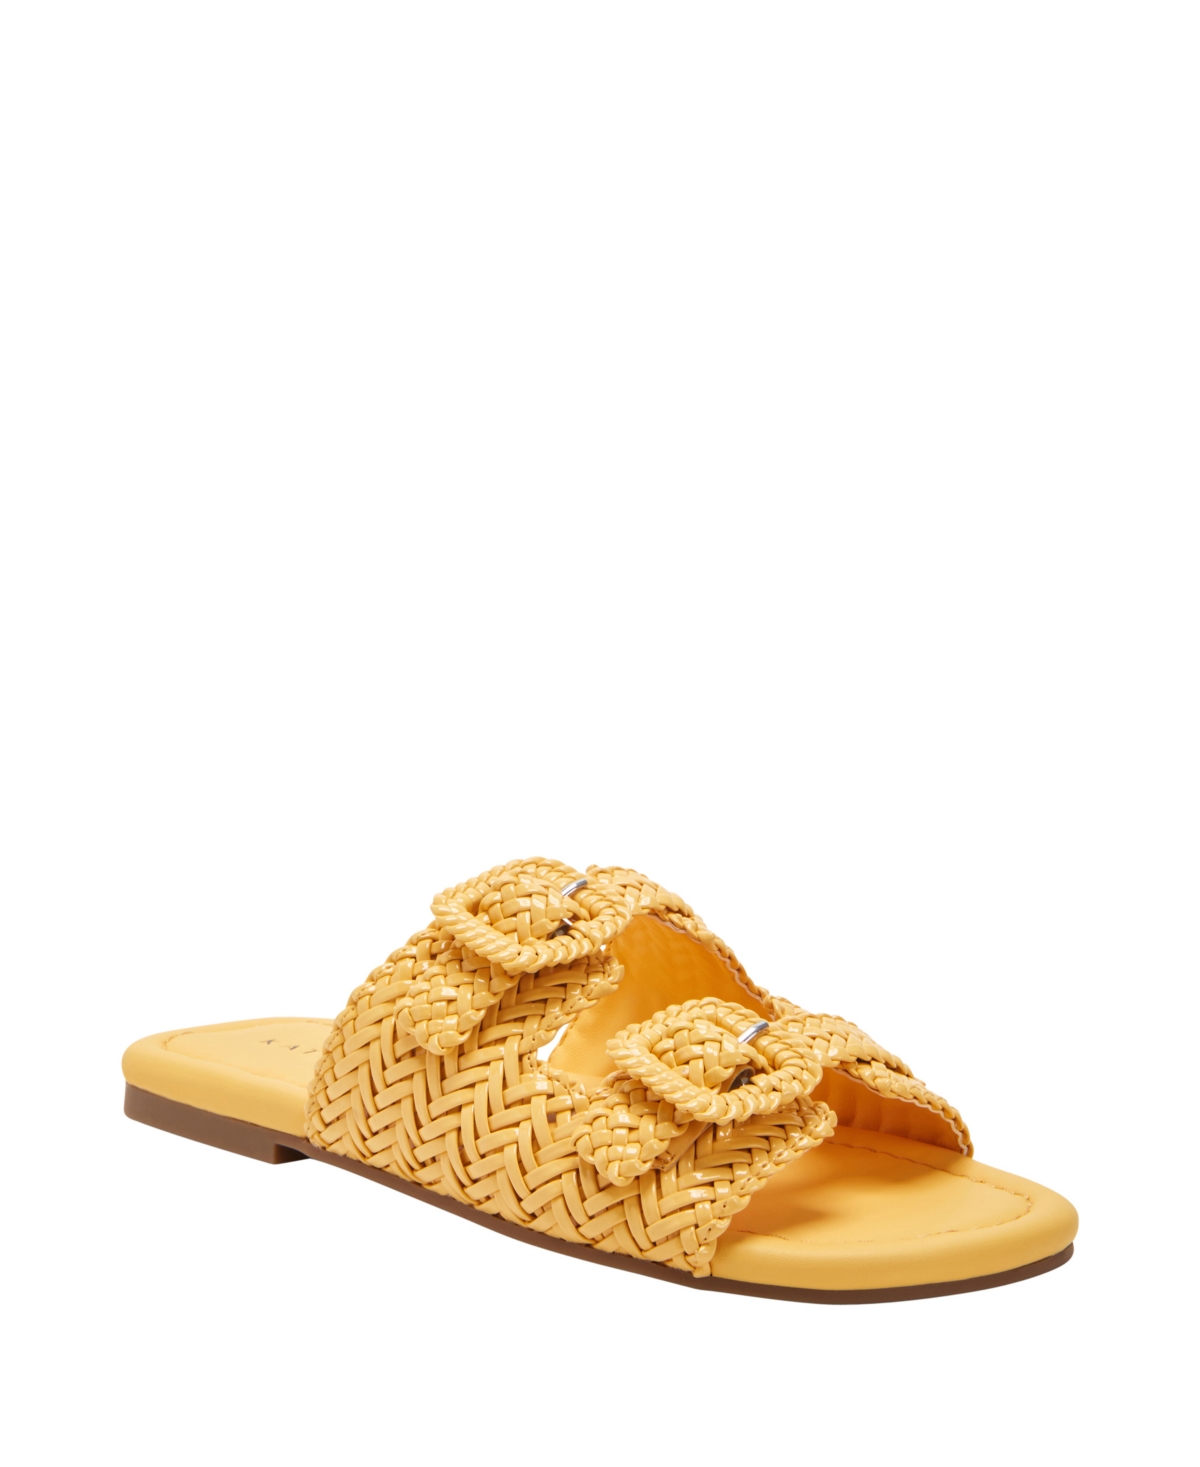 Katy Perry Women's Salvo Buckle Round Toe Sandals In Pineapple